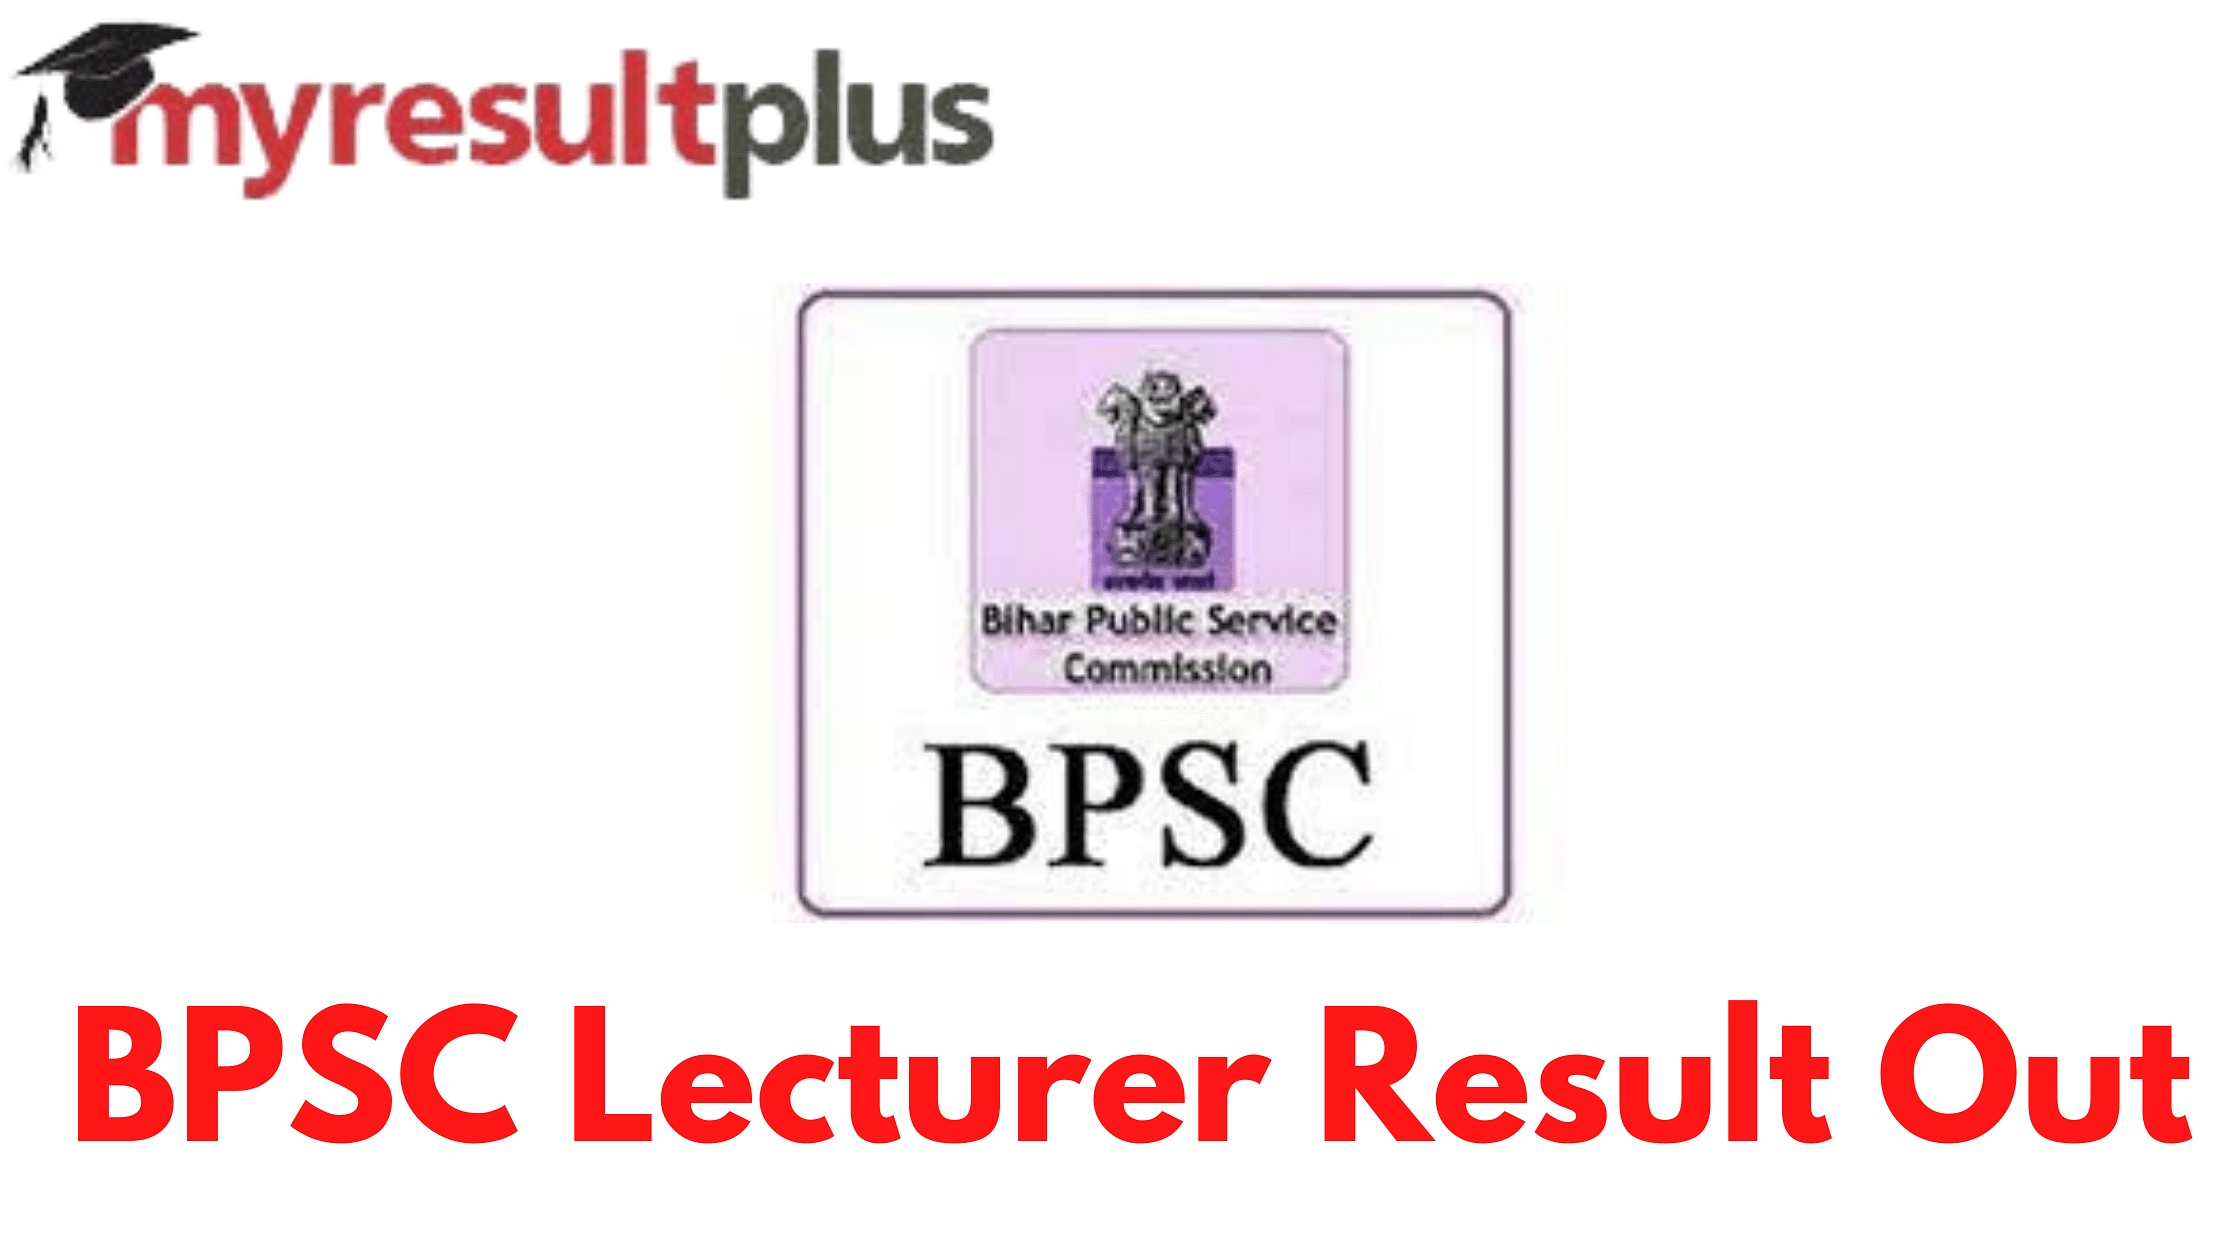 BPSC Lecturer Result Announced, Check Through Direct Link Here